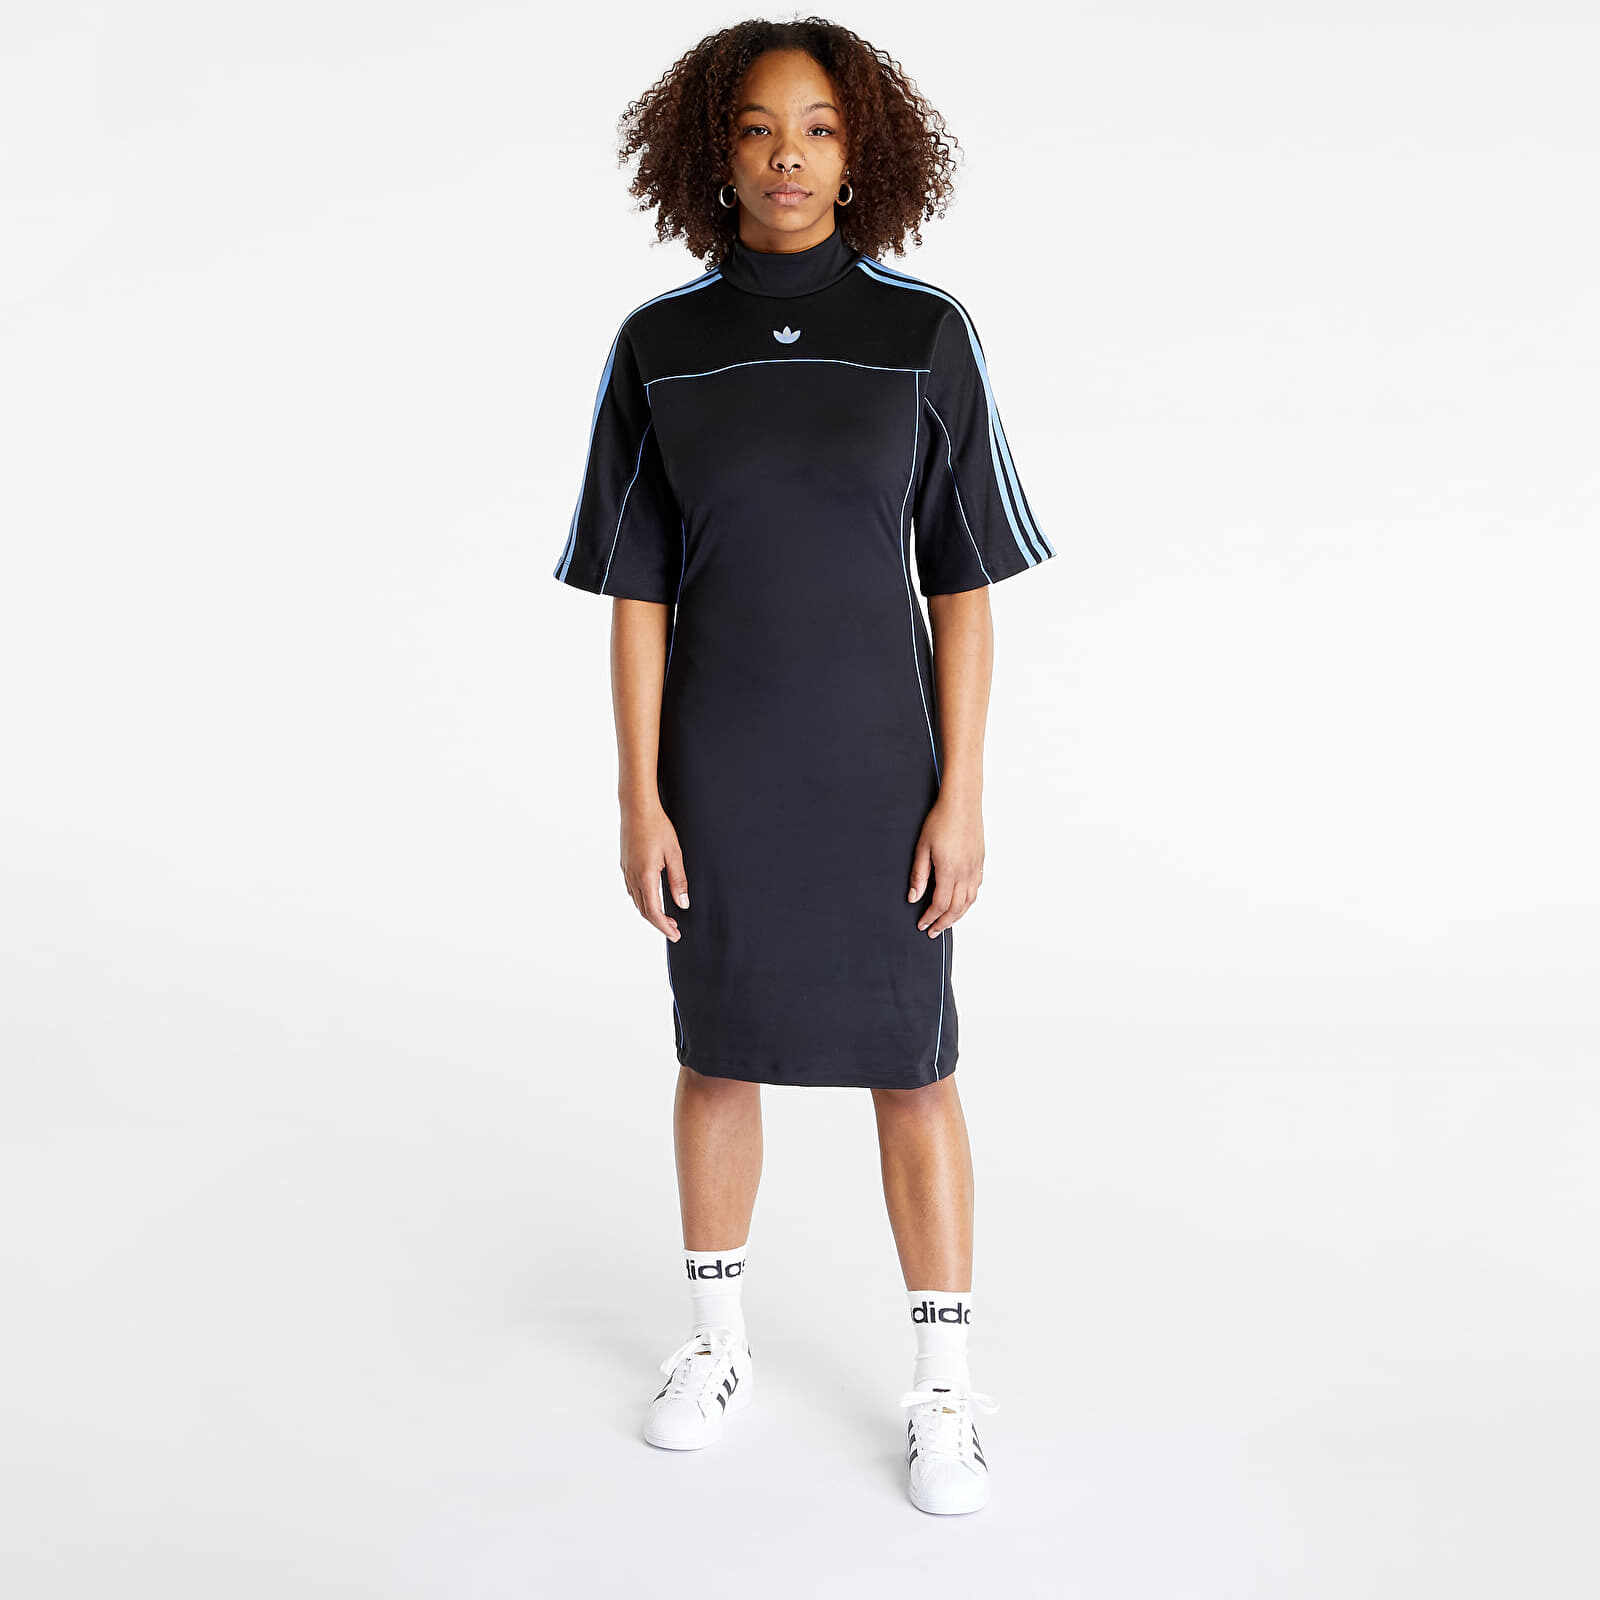 adidas Fitted Dress Black